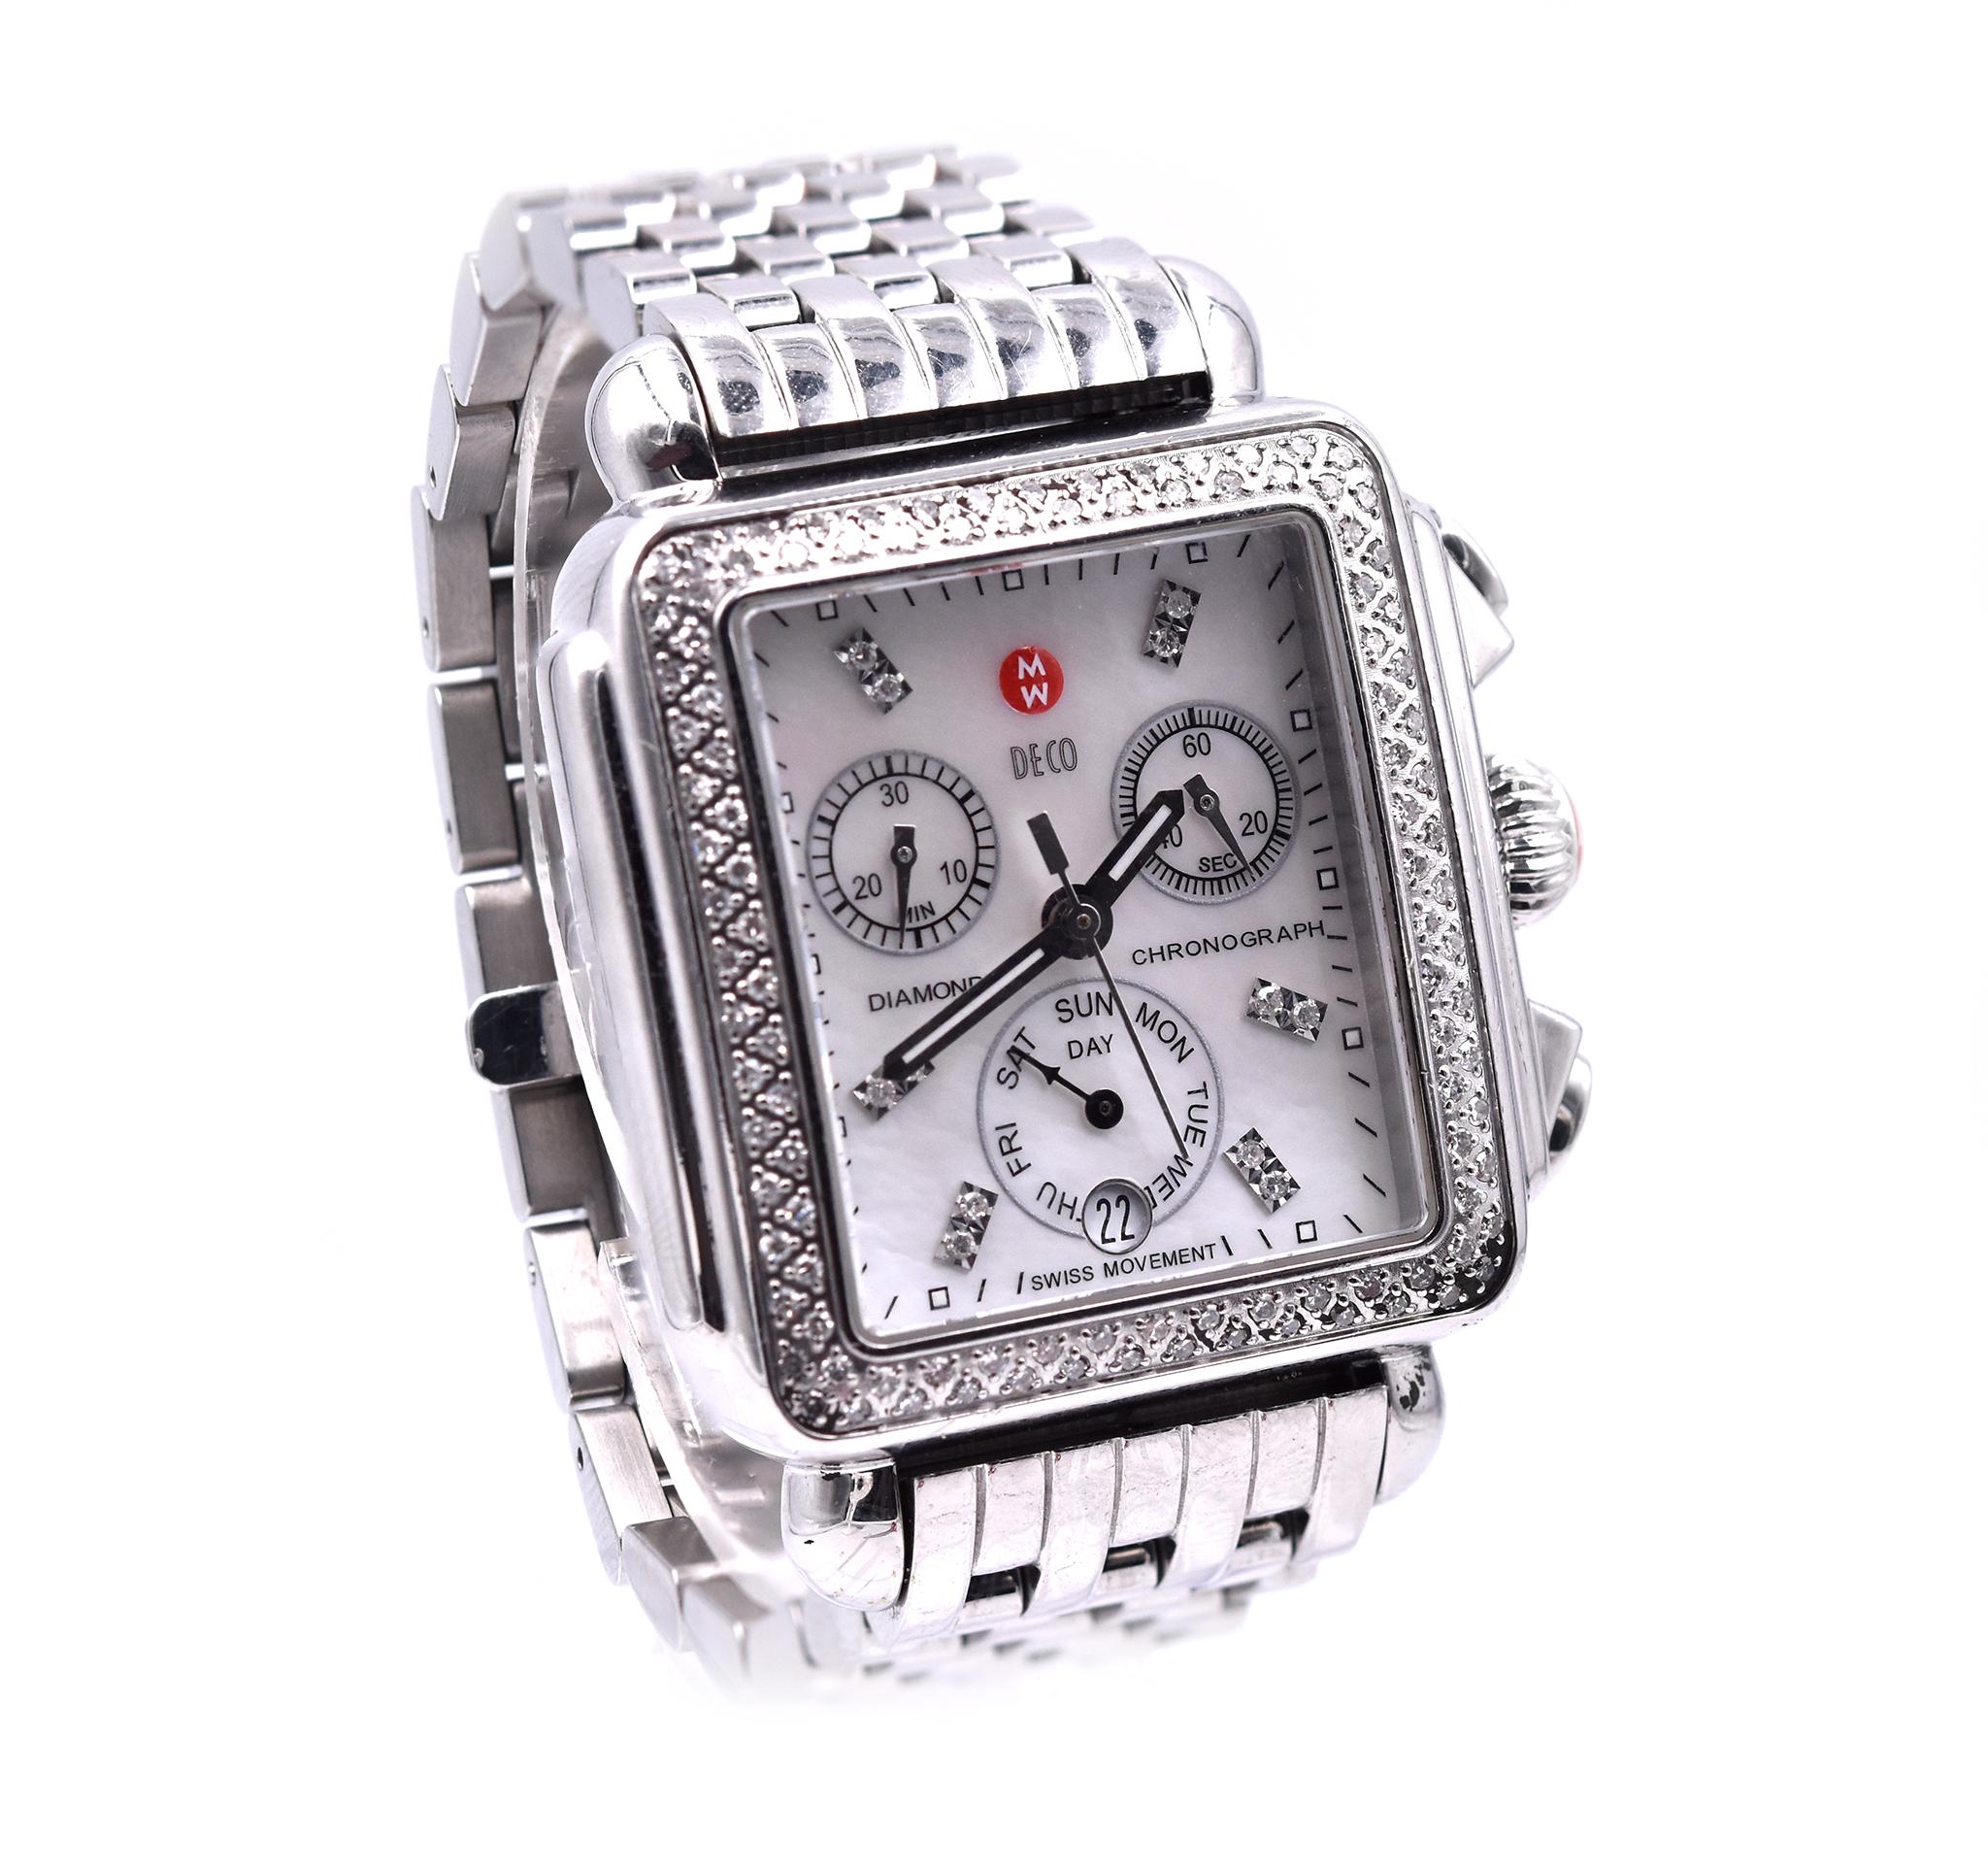 Movement: quartz
Function: hours, minutes, seconds, chronograph
Case: 33 X 35mm stainless steel square diamond case, sapphire crystal
Dial: white mother of pearl chrono dial, diamond markers 
Band: stainless steel link bracelet
Serial #: